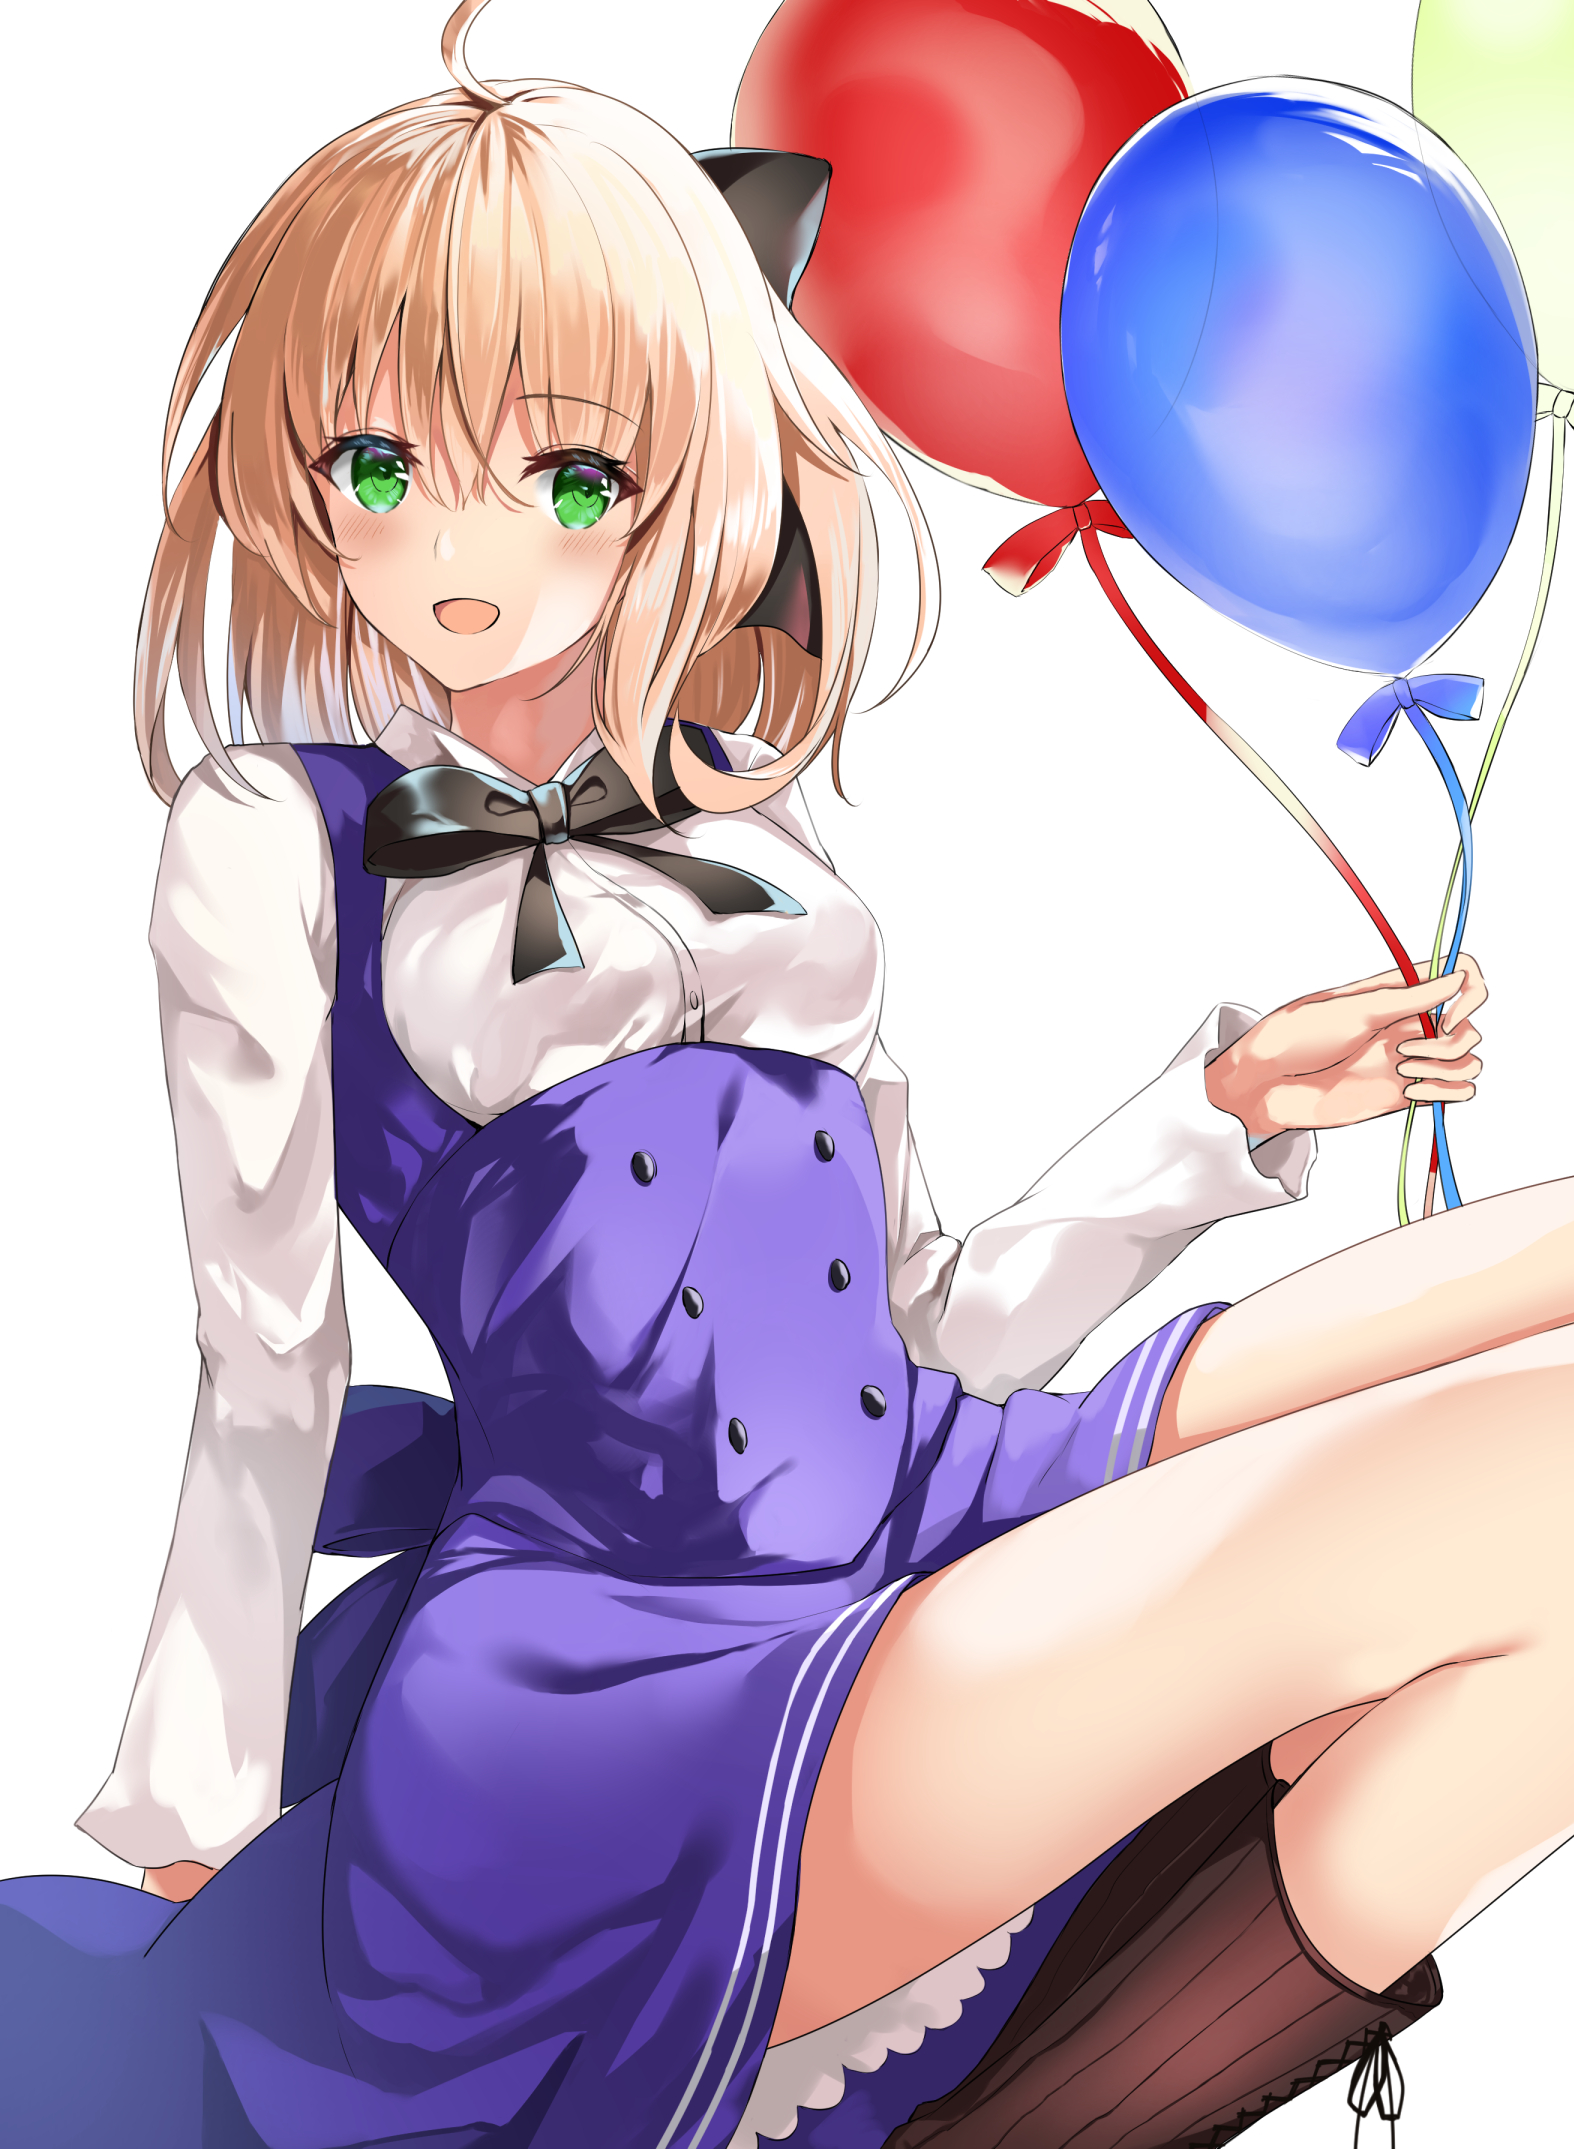 Anime 1574x2149 anime anime girls Fate series Fate/Unlimited Codes  Fate/Grand Order blonde Saber Lily Artoria Pendragon